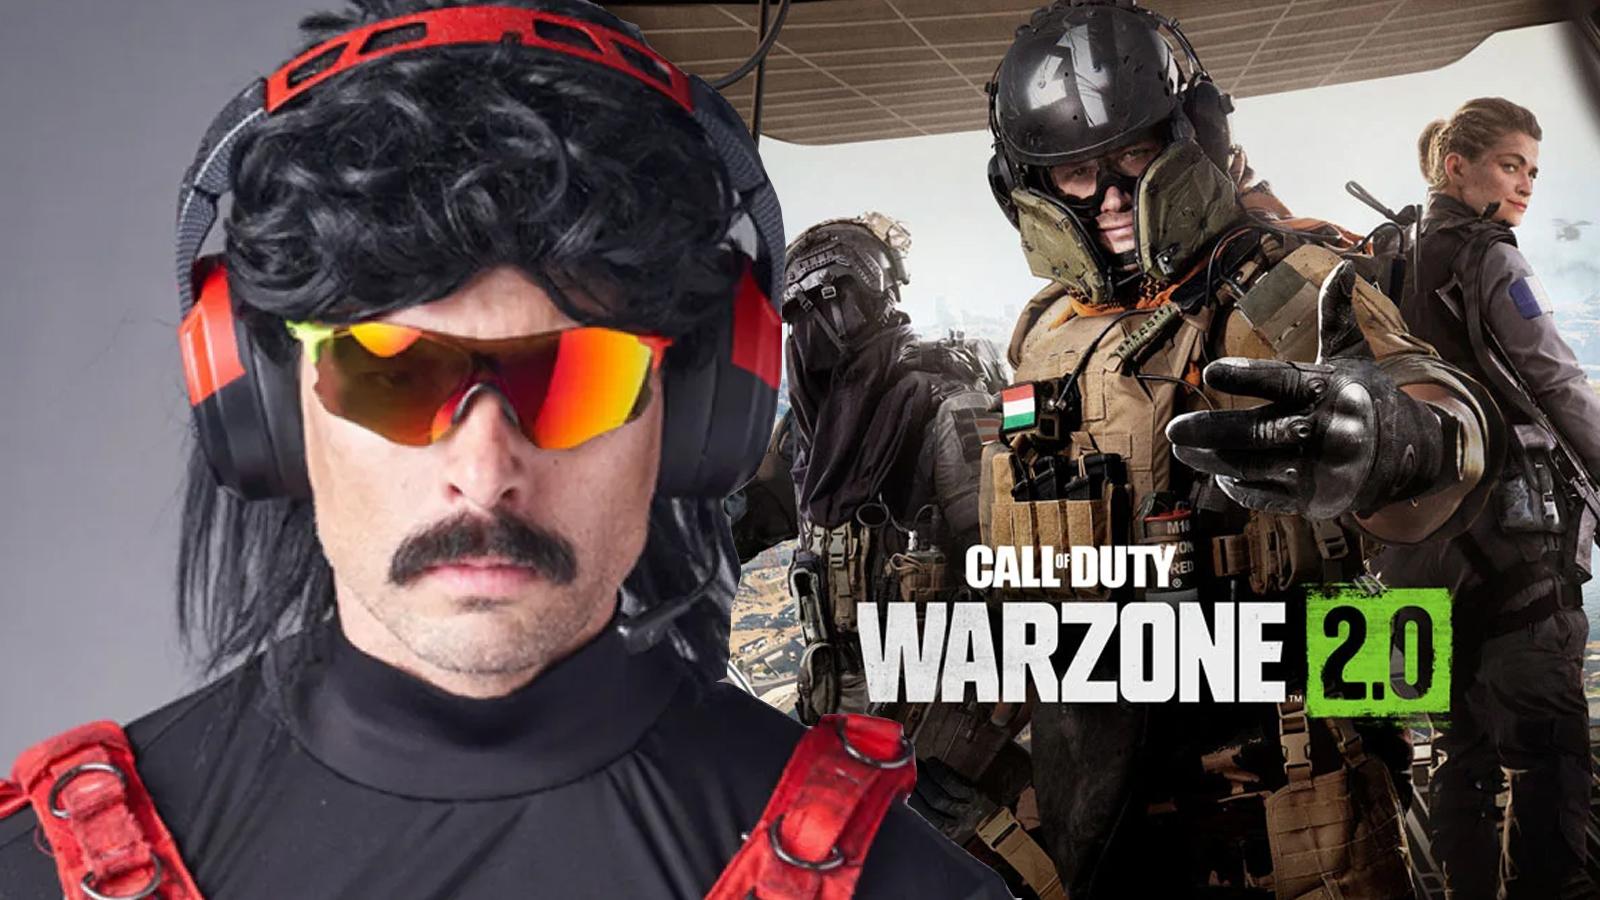 🔴LIVE - DR DISRESPECT - WARZONE 2.0 - EXCLUSIVE GAMEPLAY 